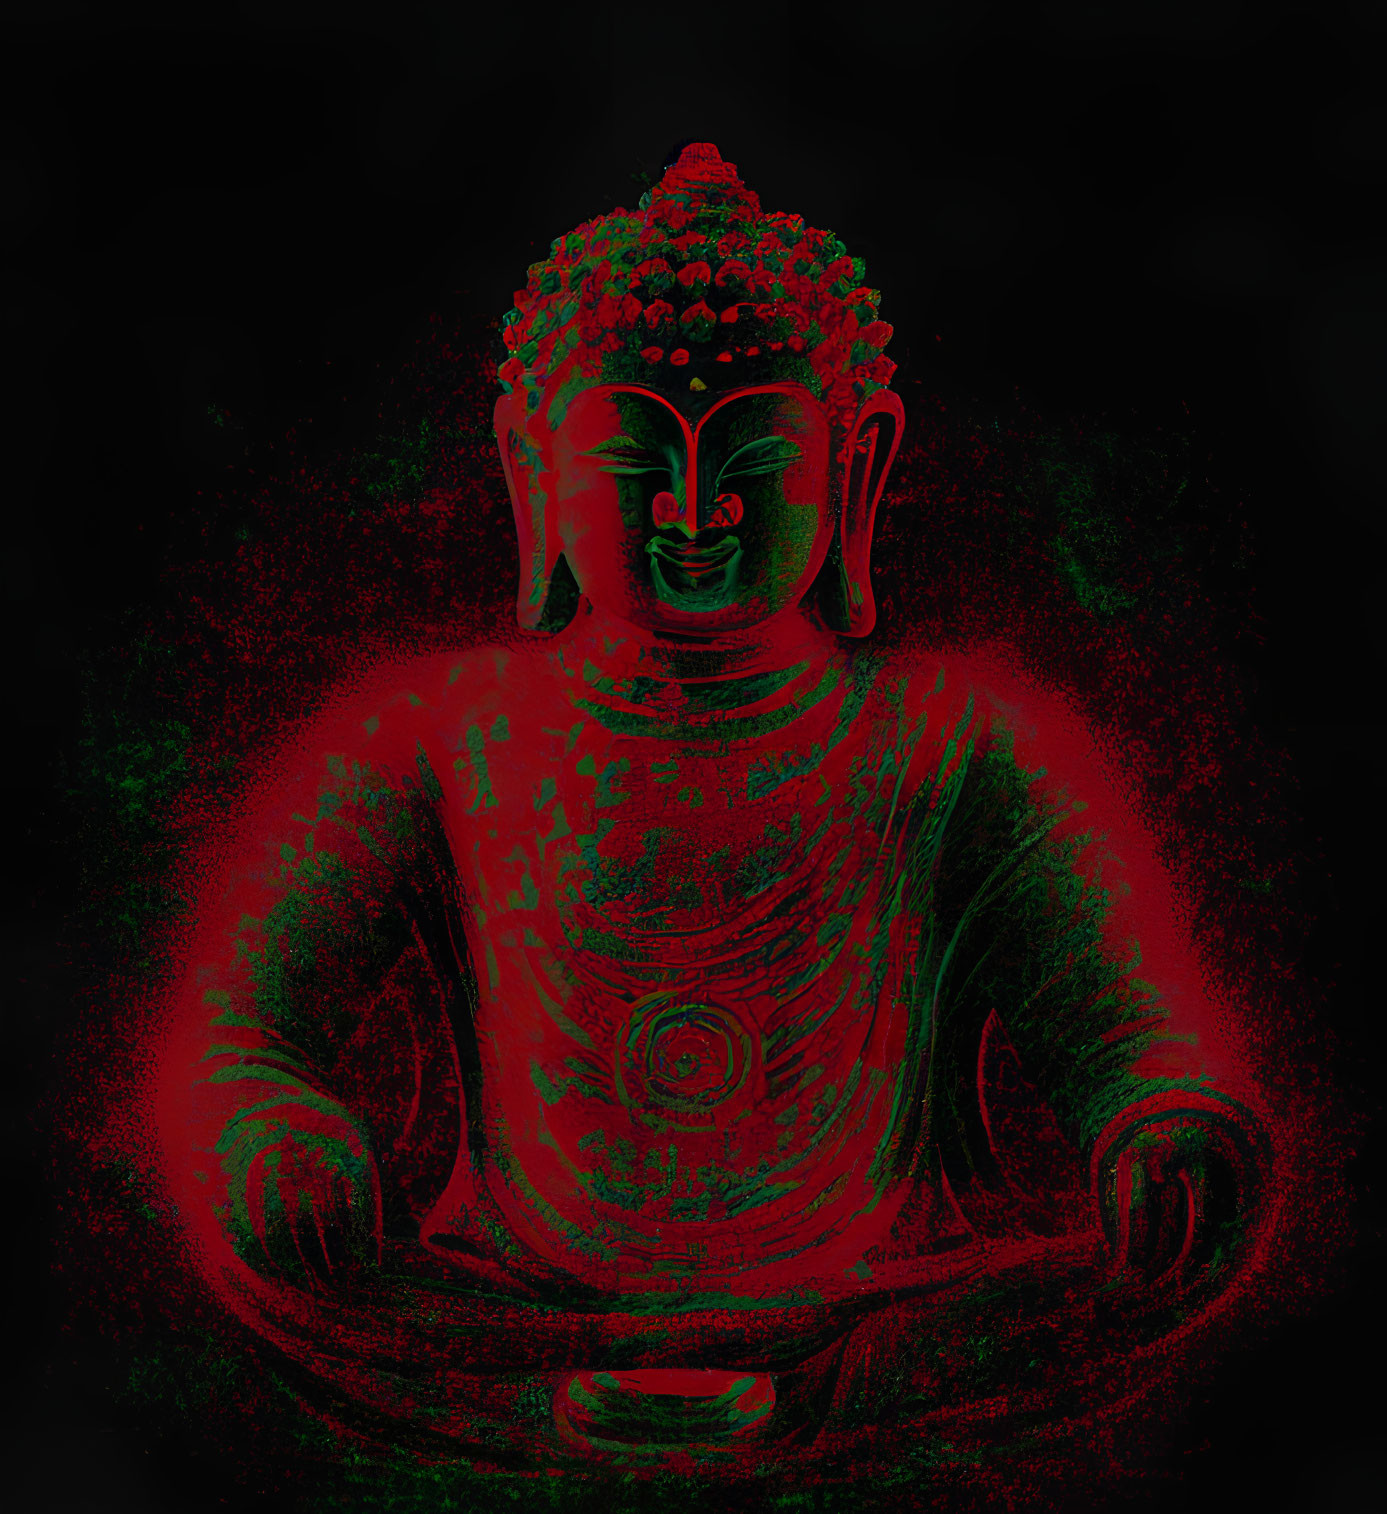 Digital art: Glowing Buddha statue with red and green aura on dark background